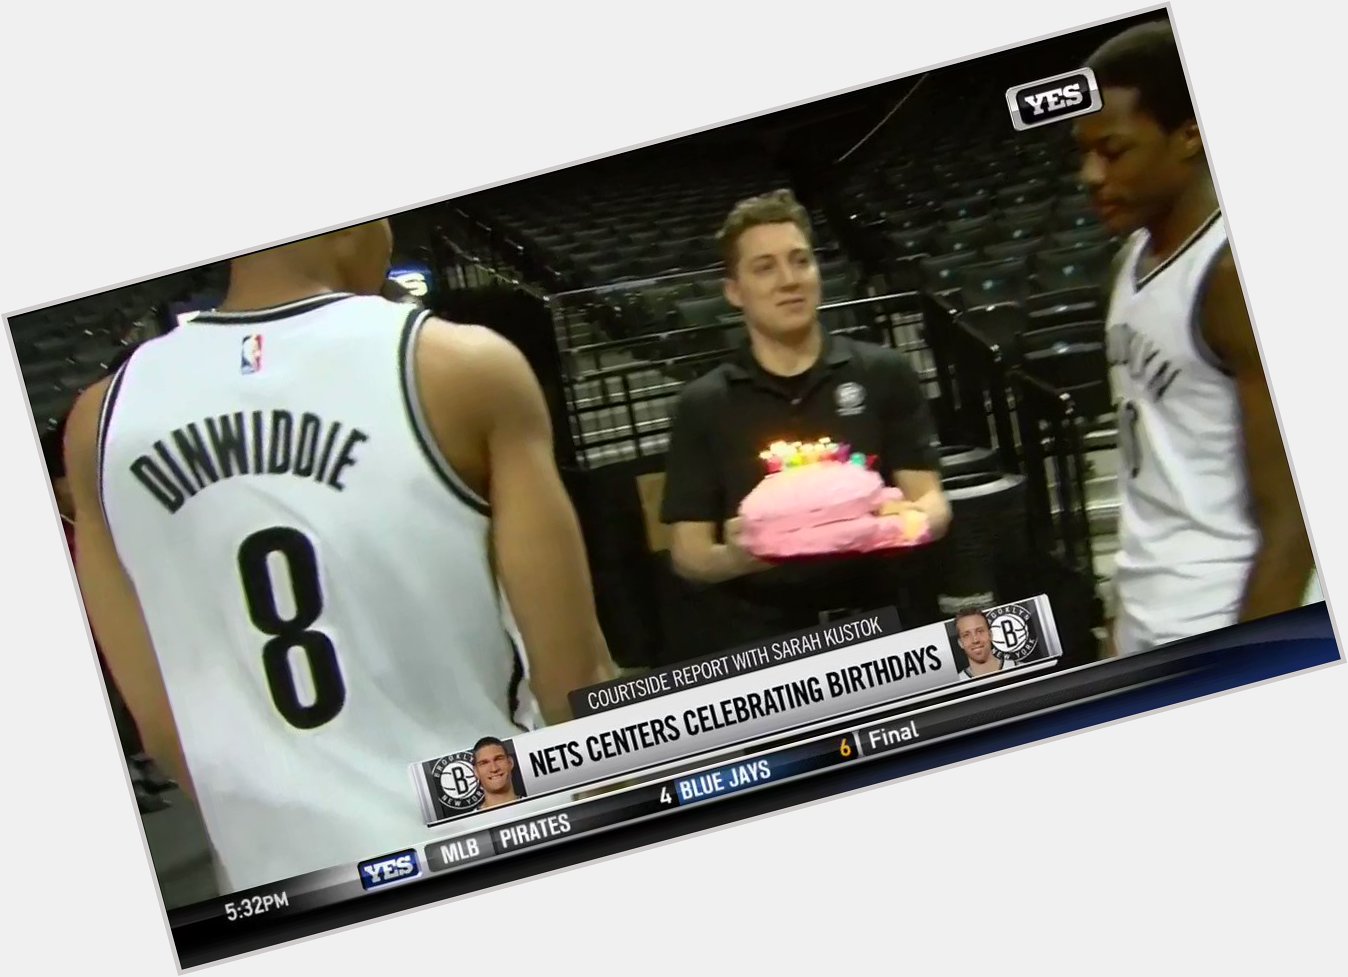 The surprise their big men with a cake!

Happy birthday, Brook Lopez & Justin Hamilton! 